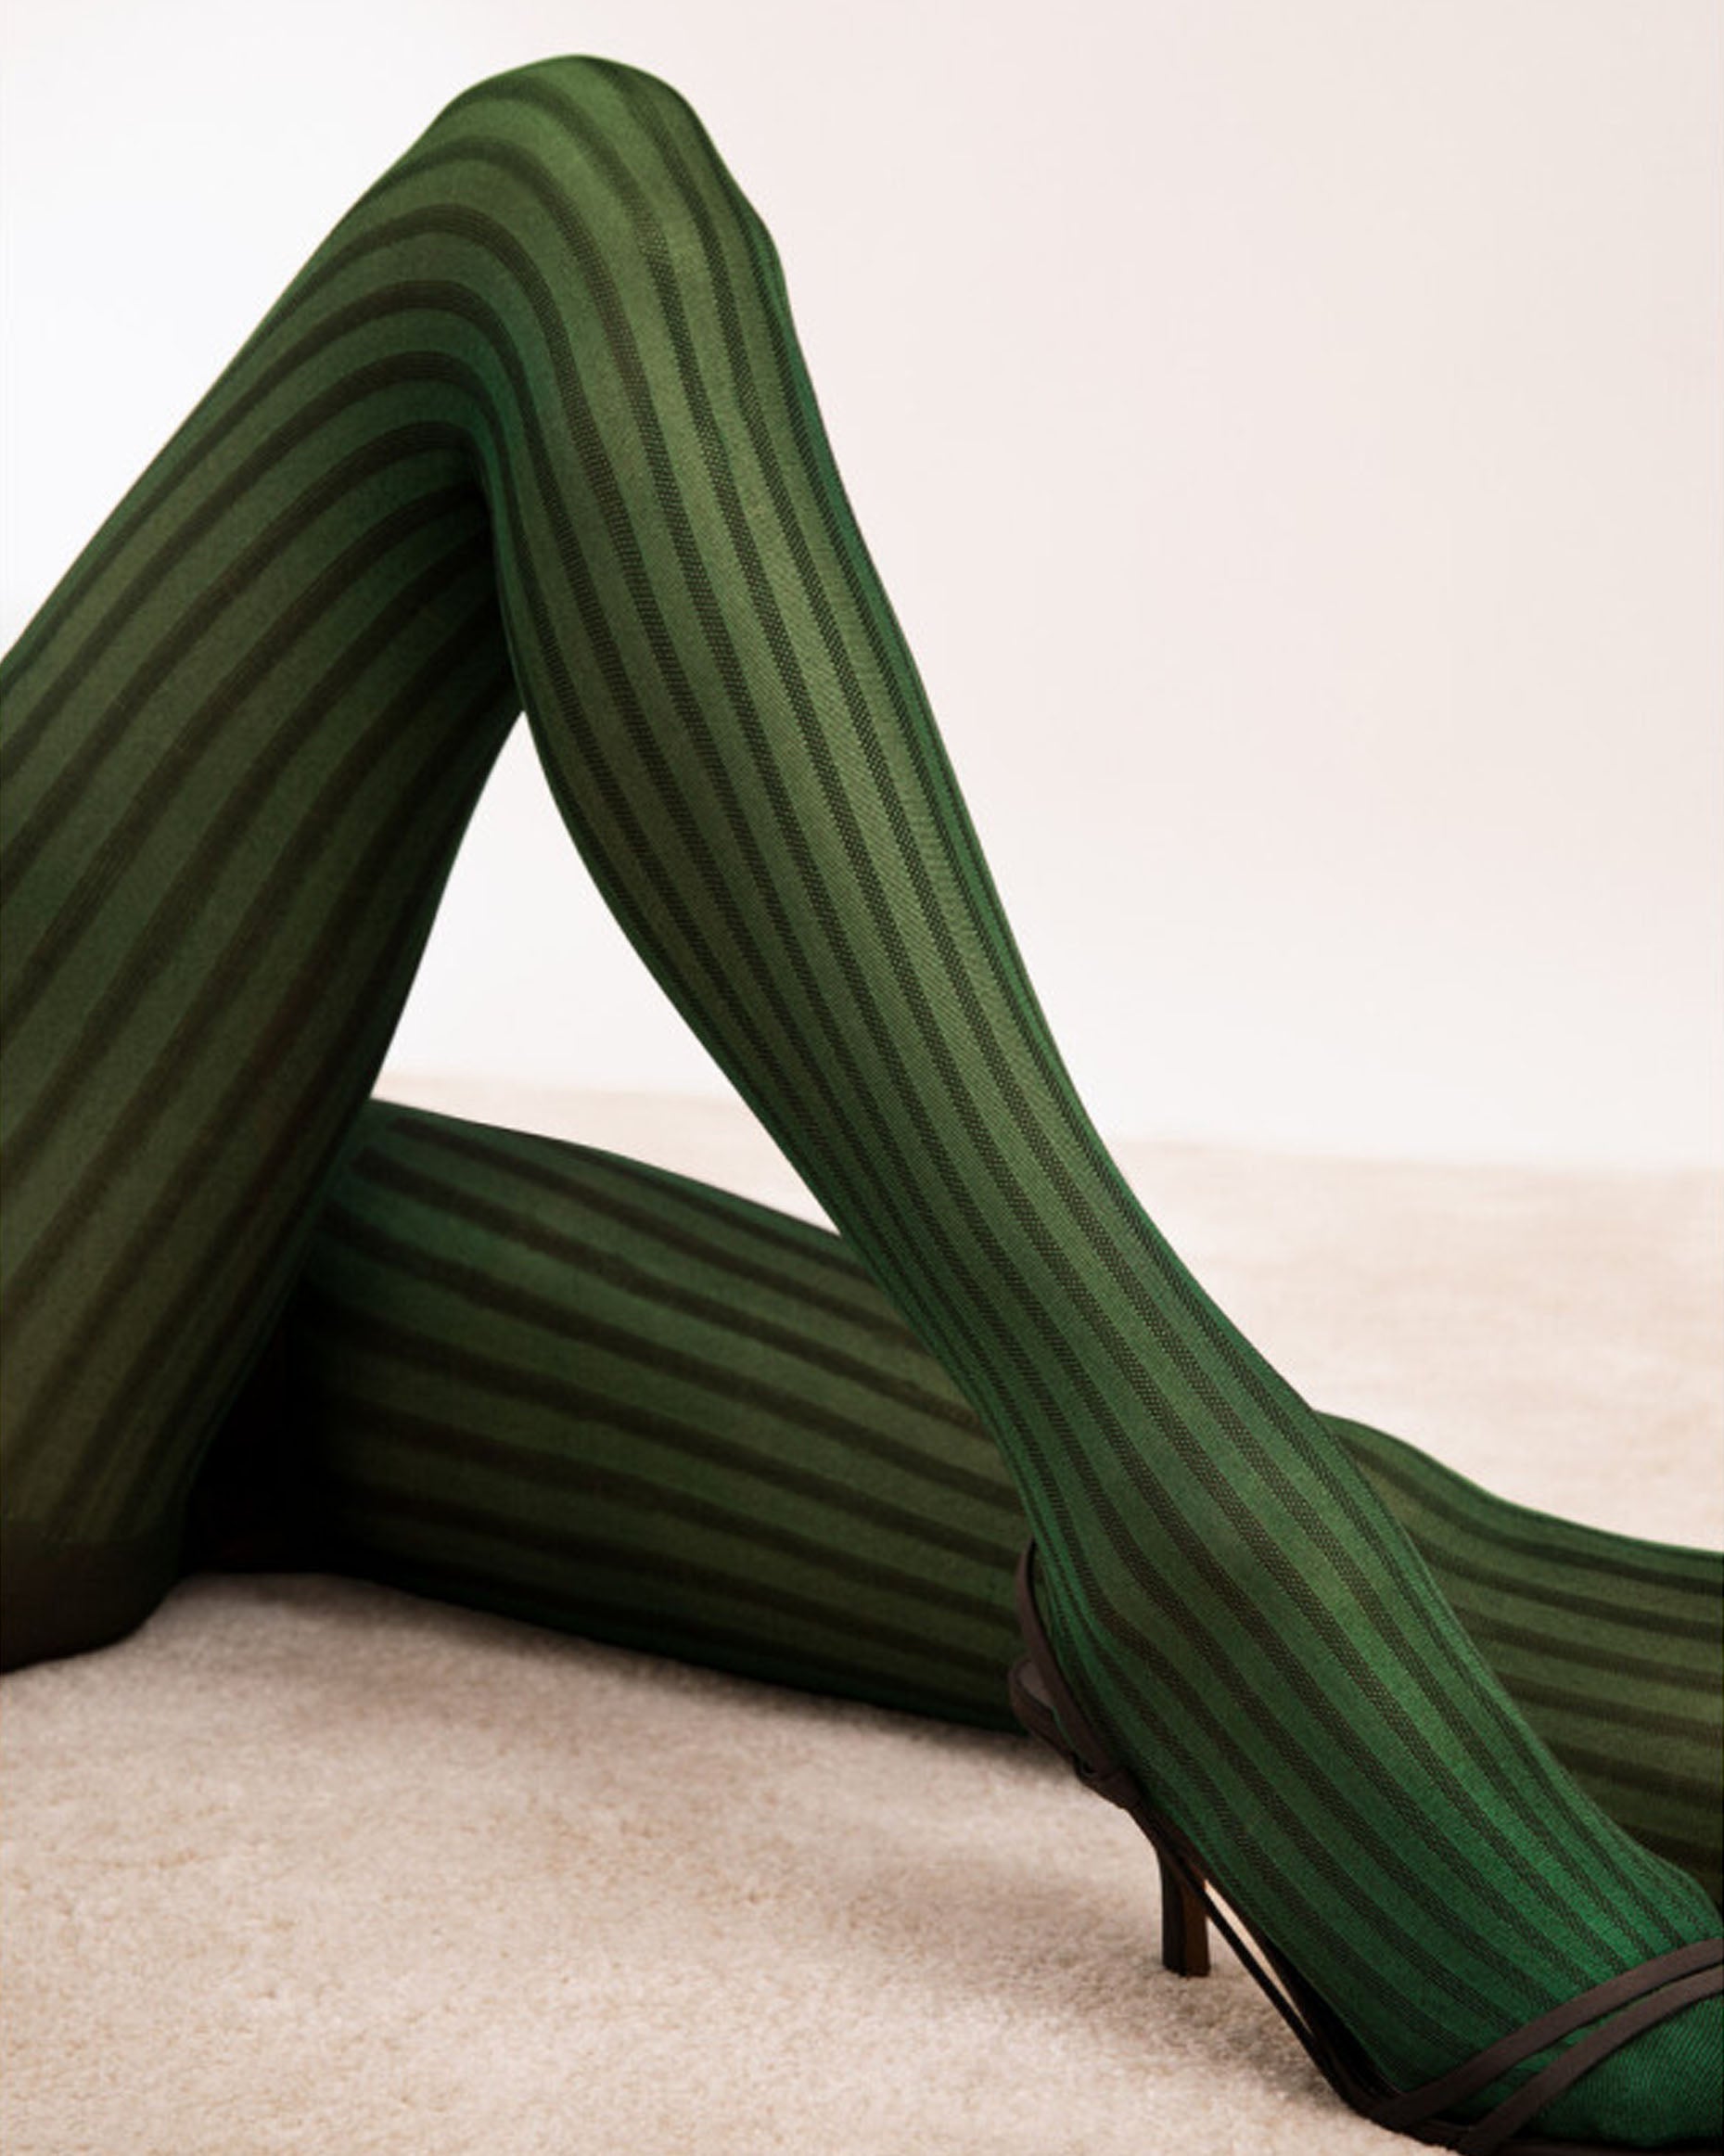 Fiore Colour Story Tights - Semi-opaque bottle green fashion tights with a two toned vertical stripe and gloss shine finish.